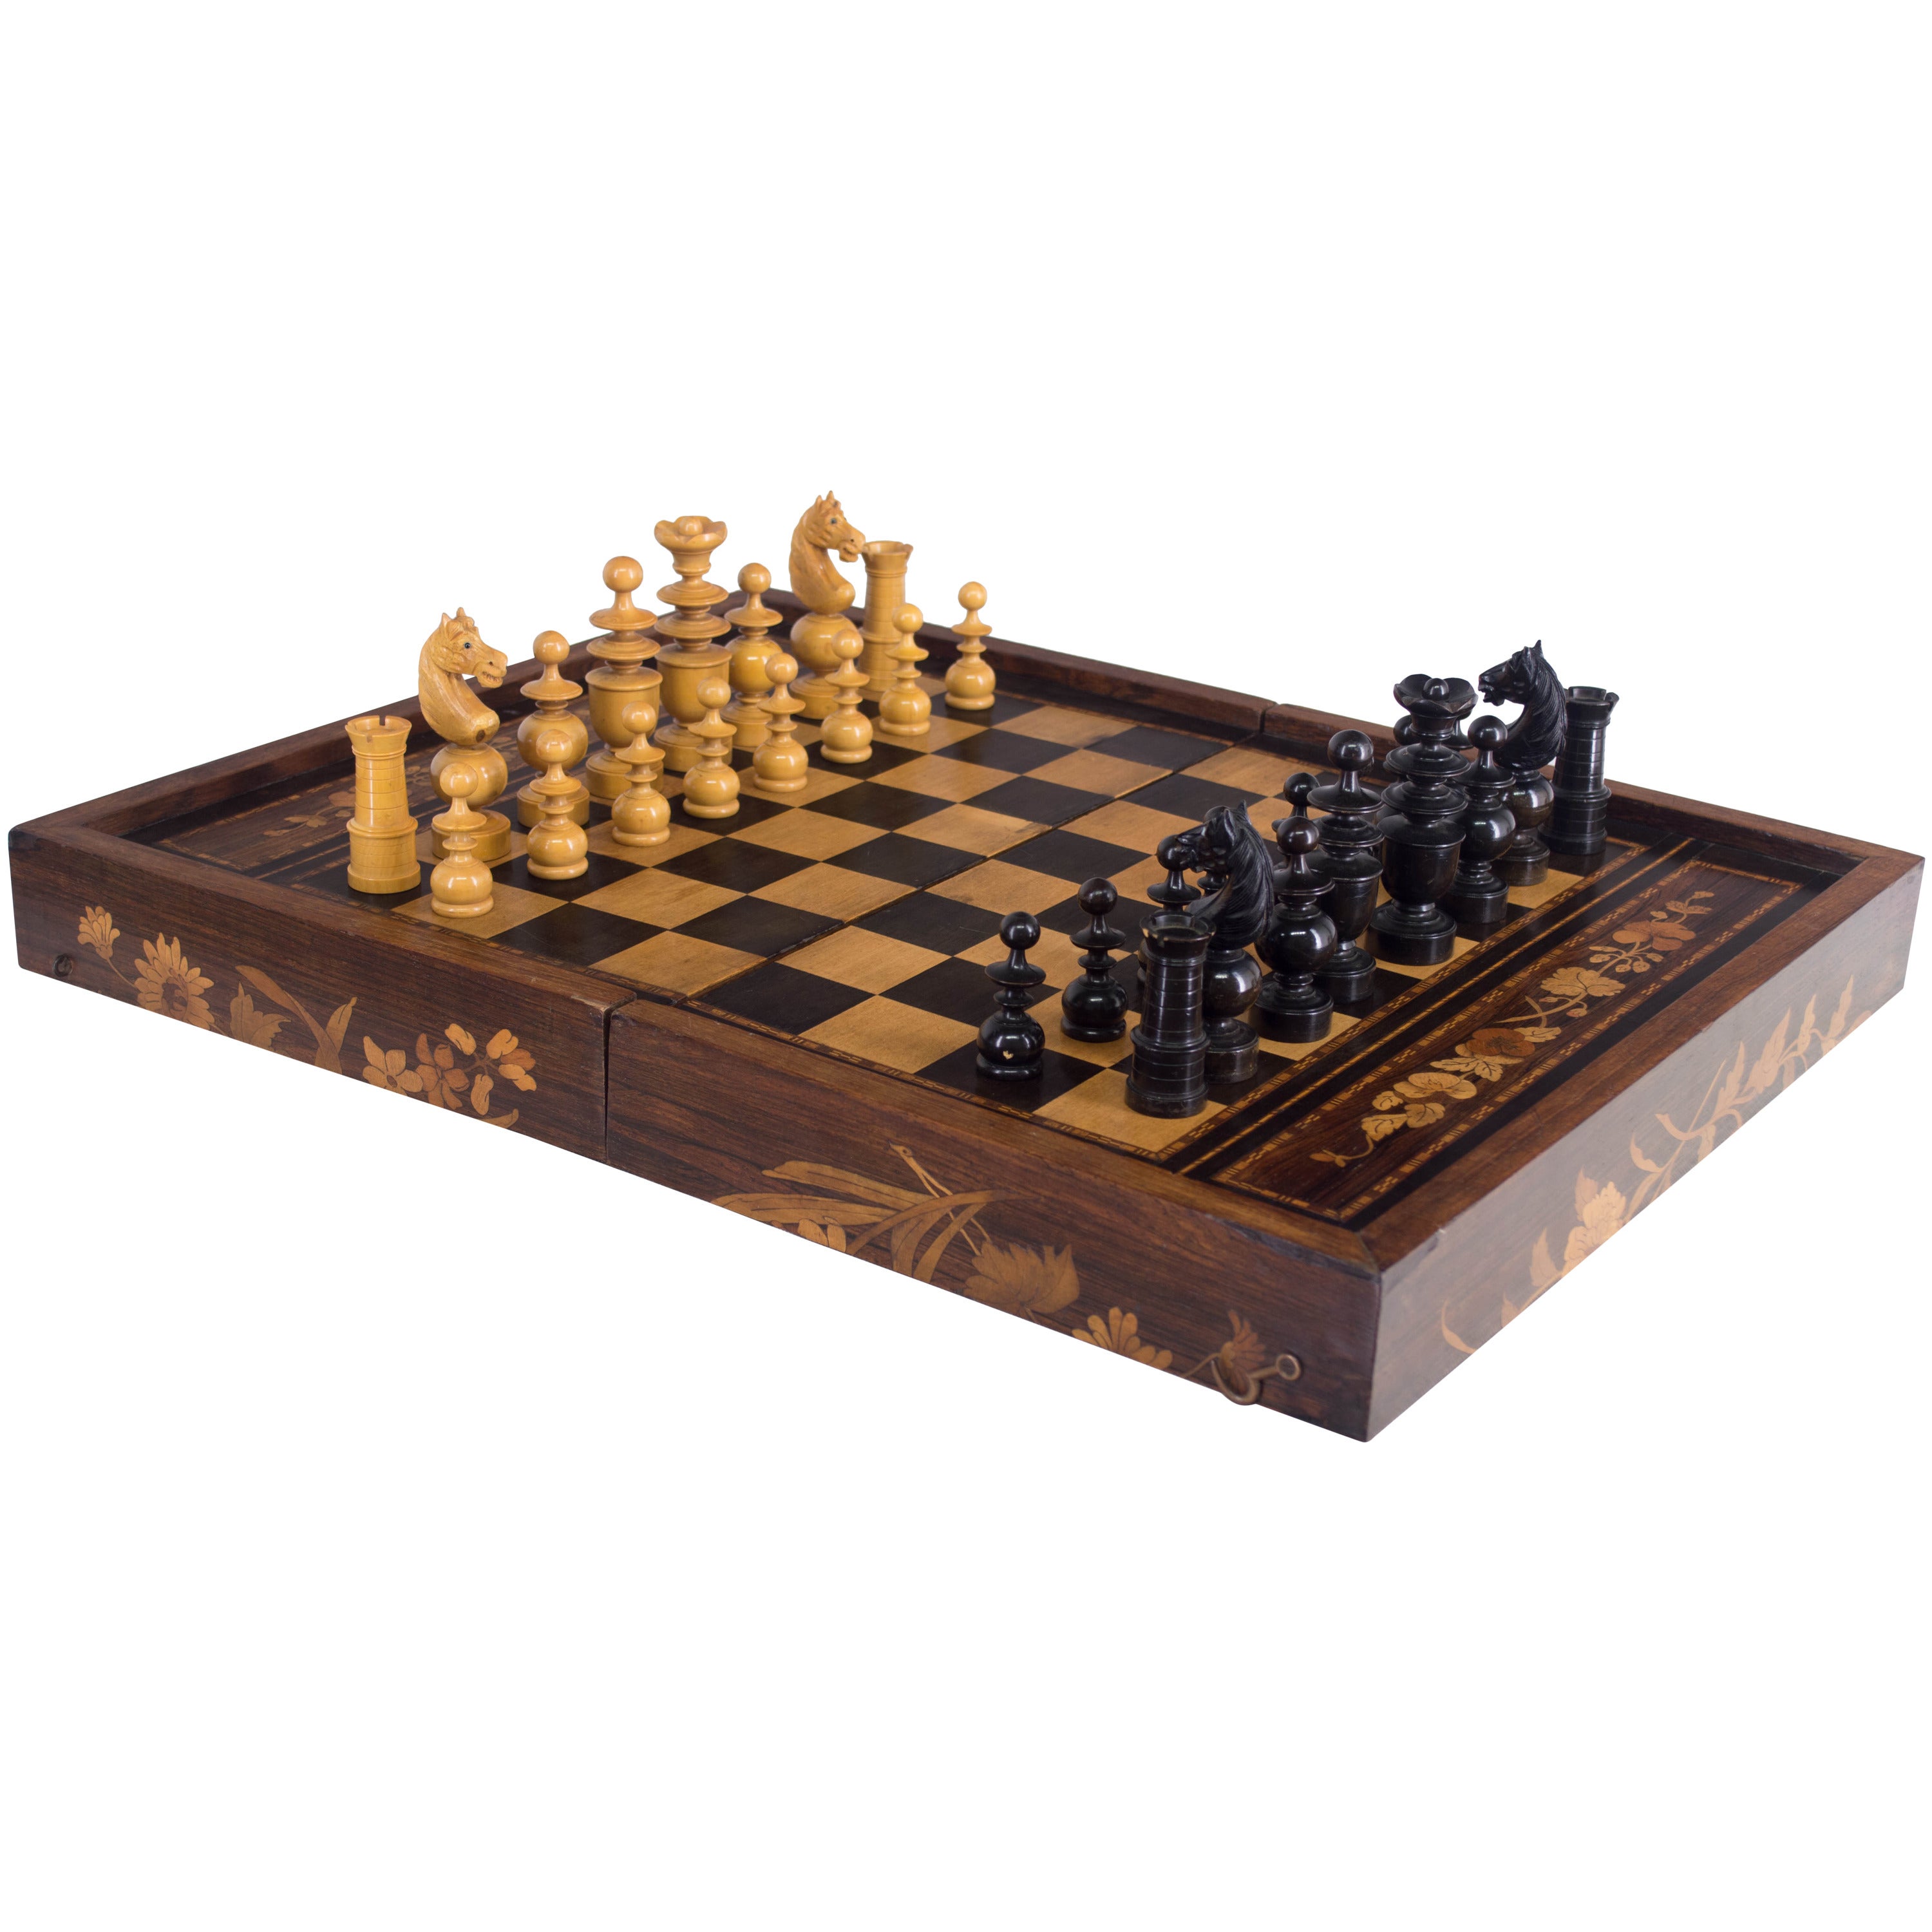 19th Century French Backgammon and Chess Set